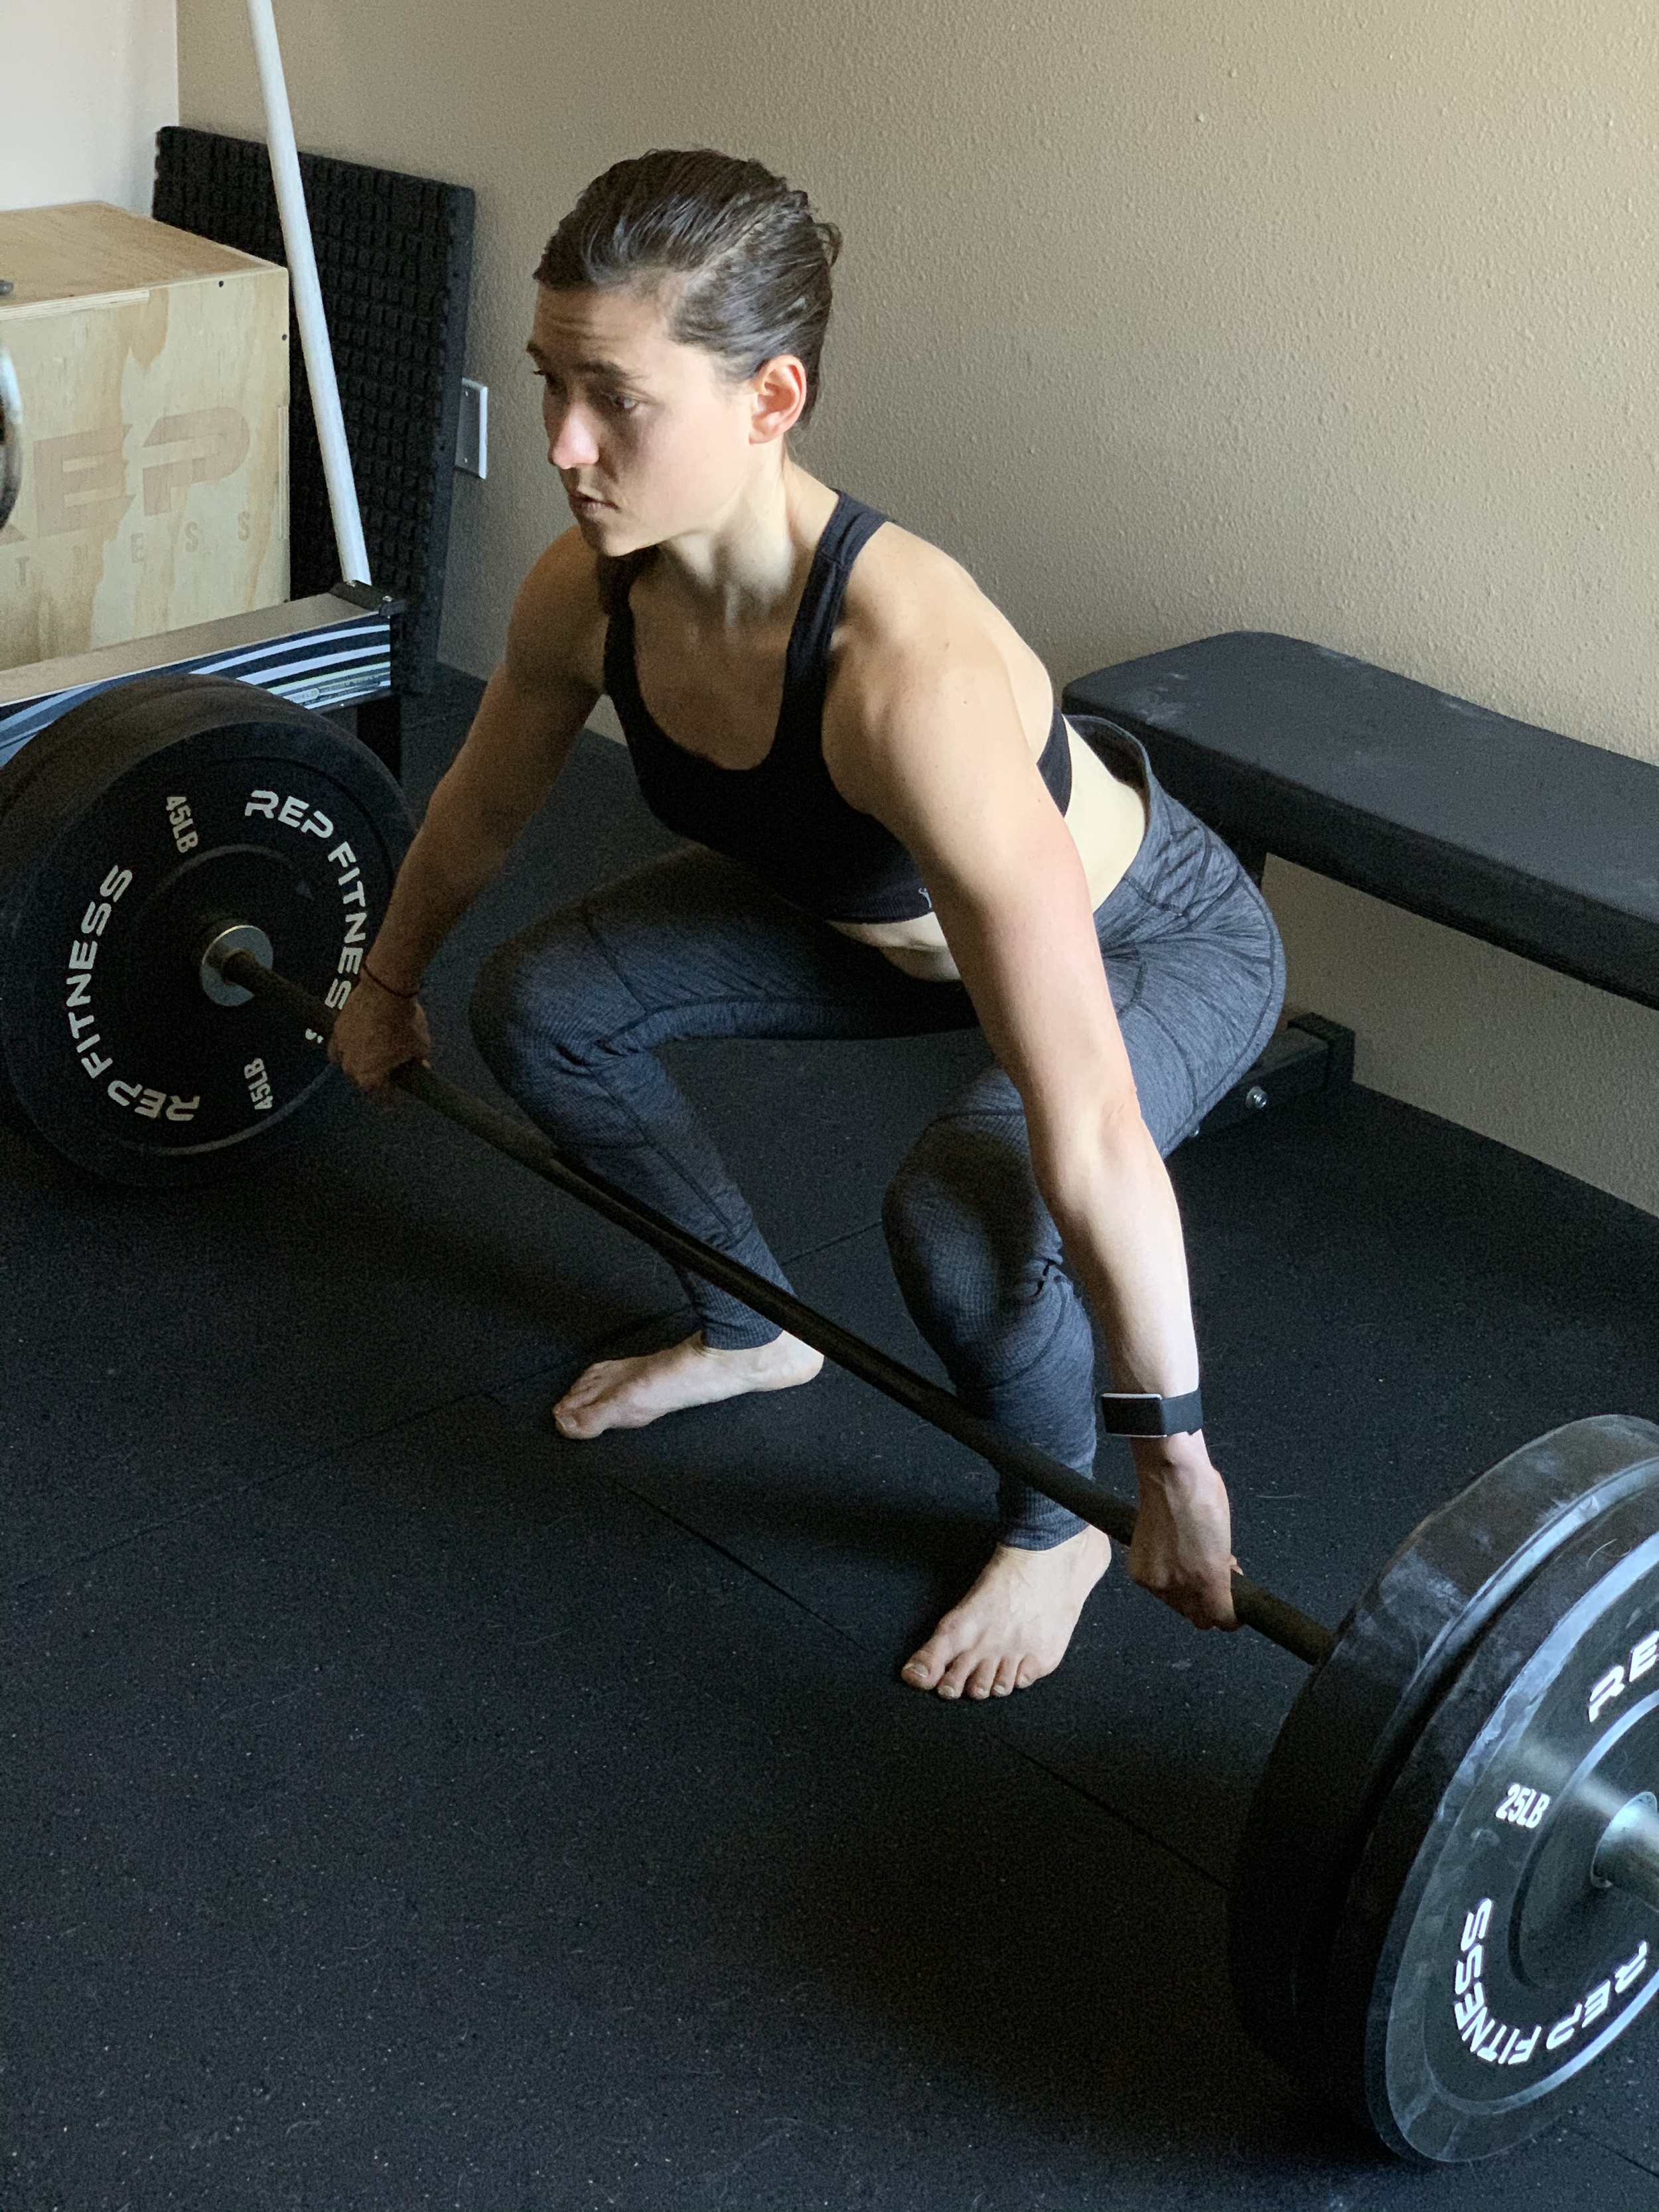 personal trainer performing snatch grip deadlift for lower body workout